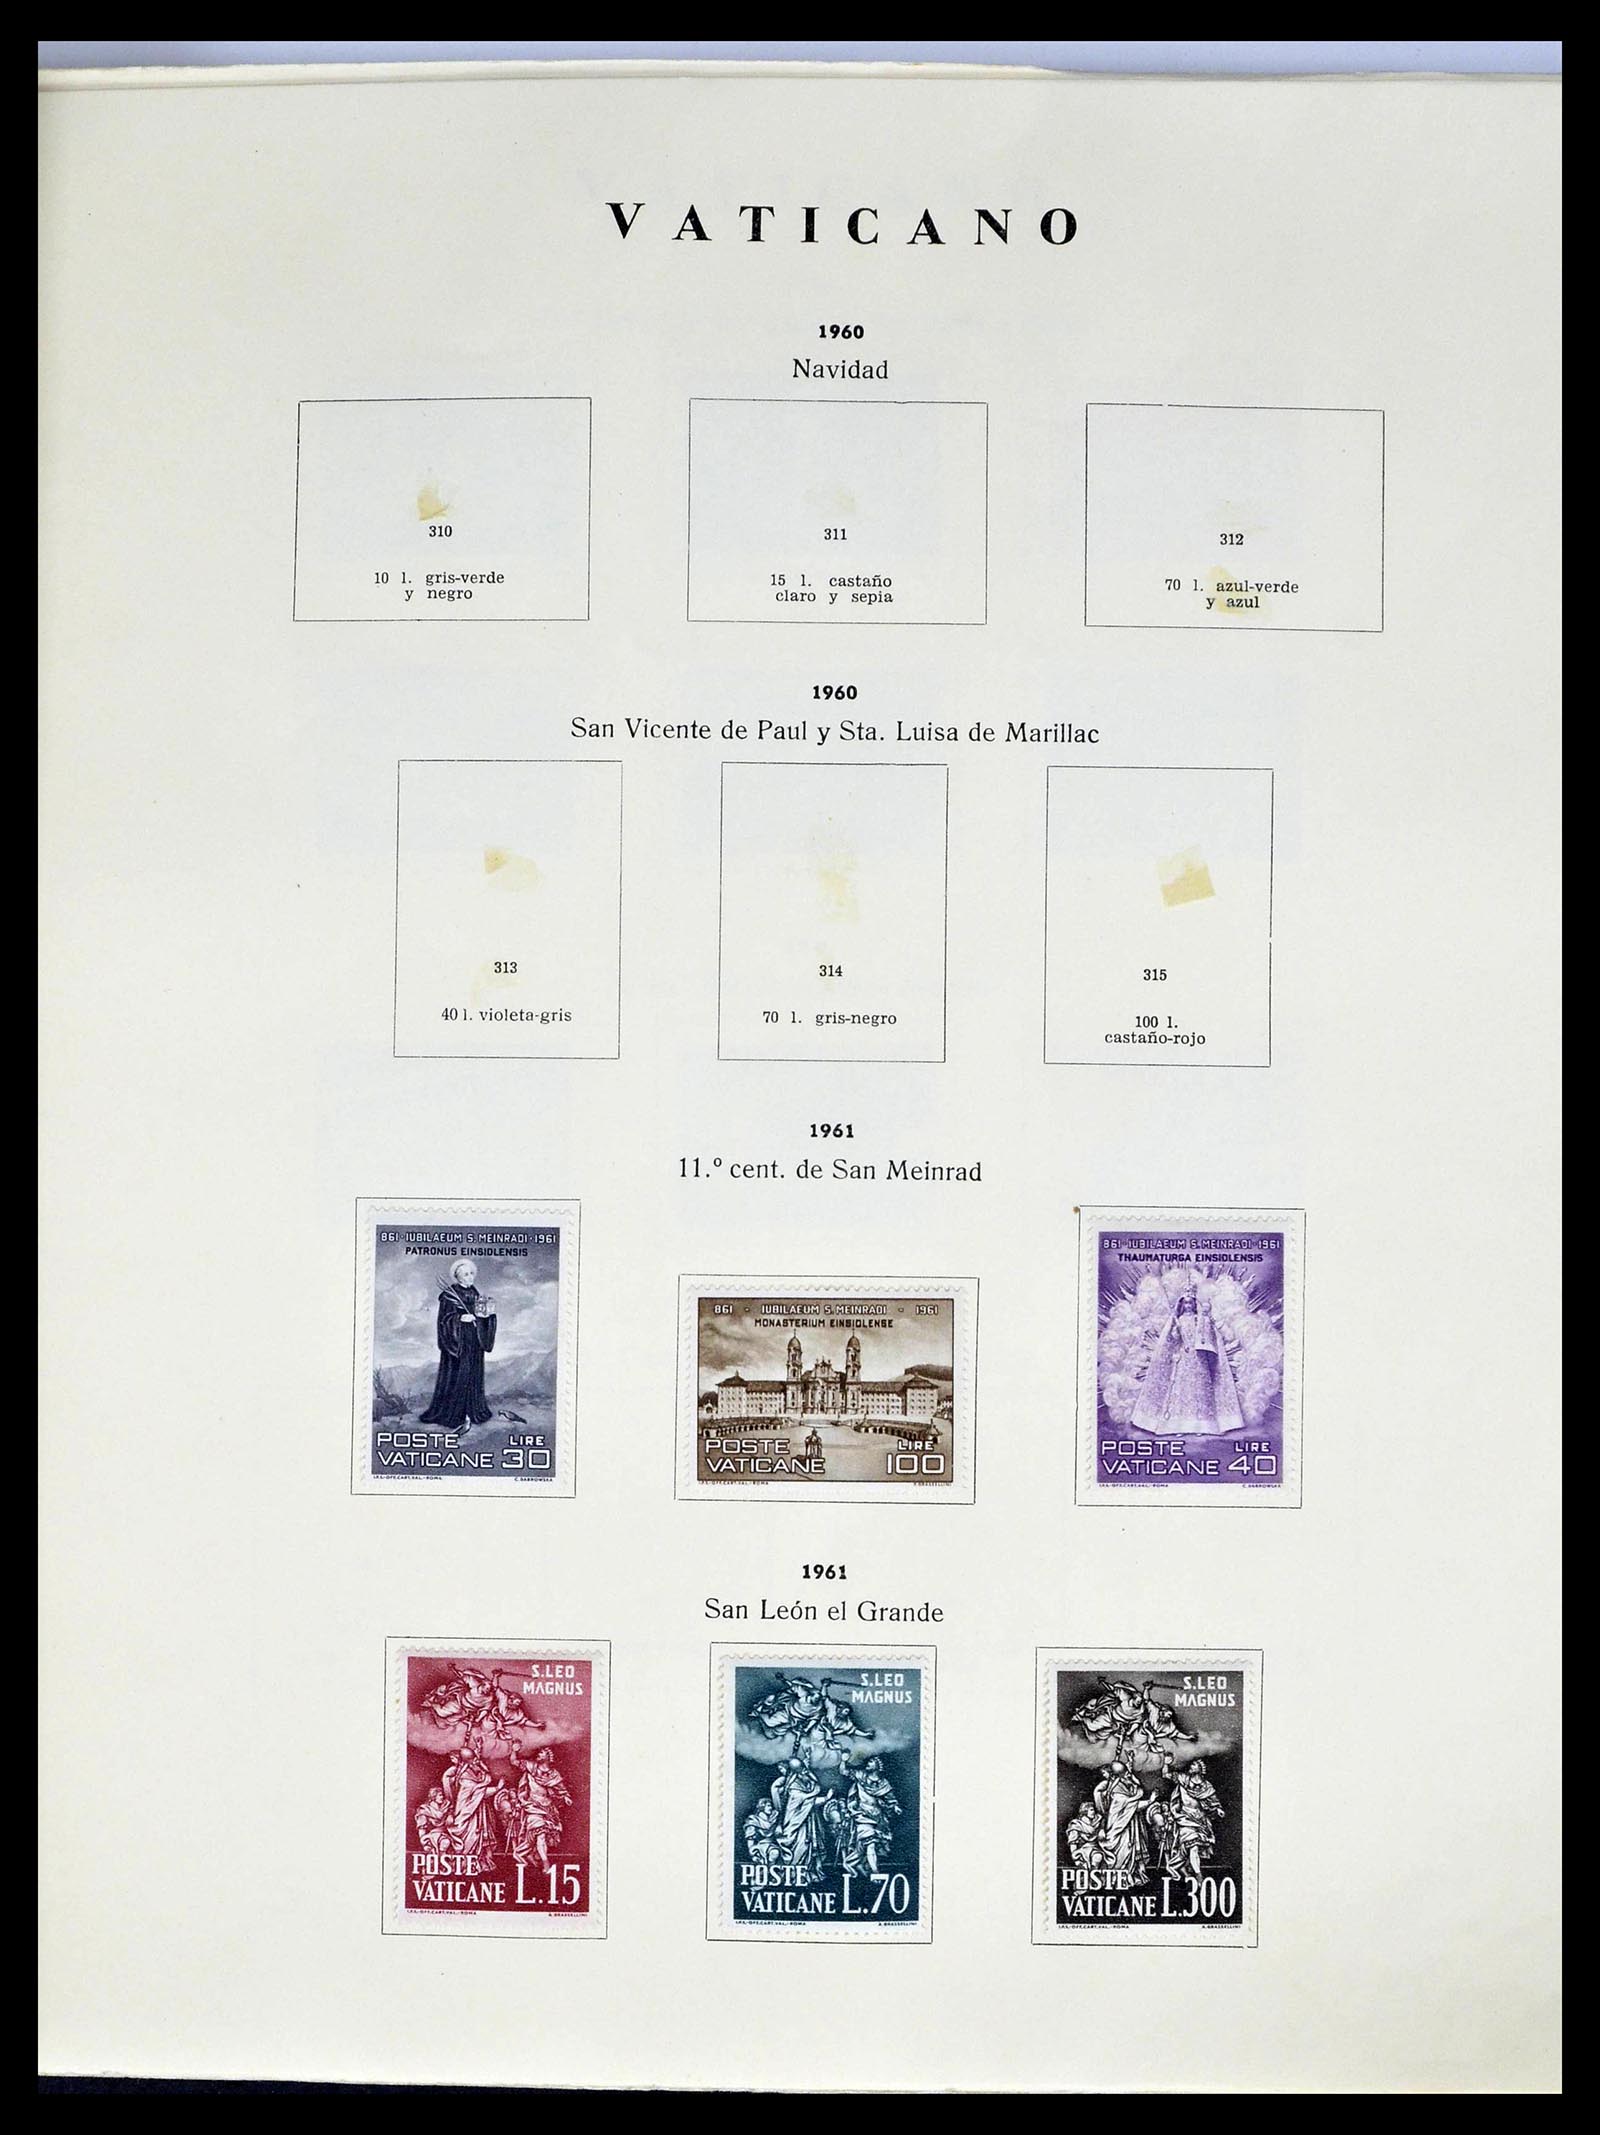 39249 0021 - Stamp collection 39249 Vatican 1852-1986.